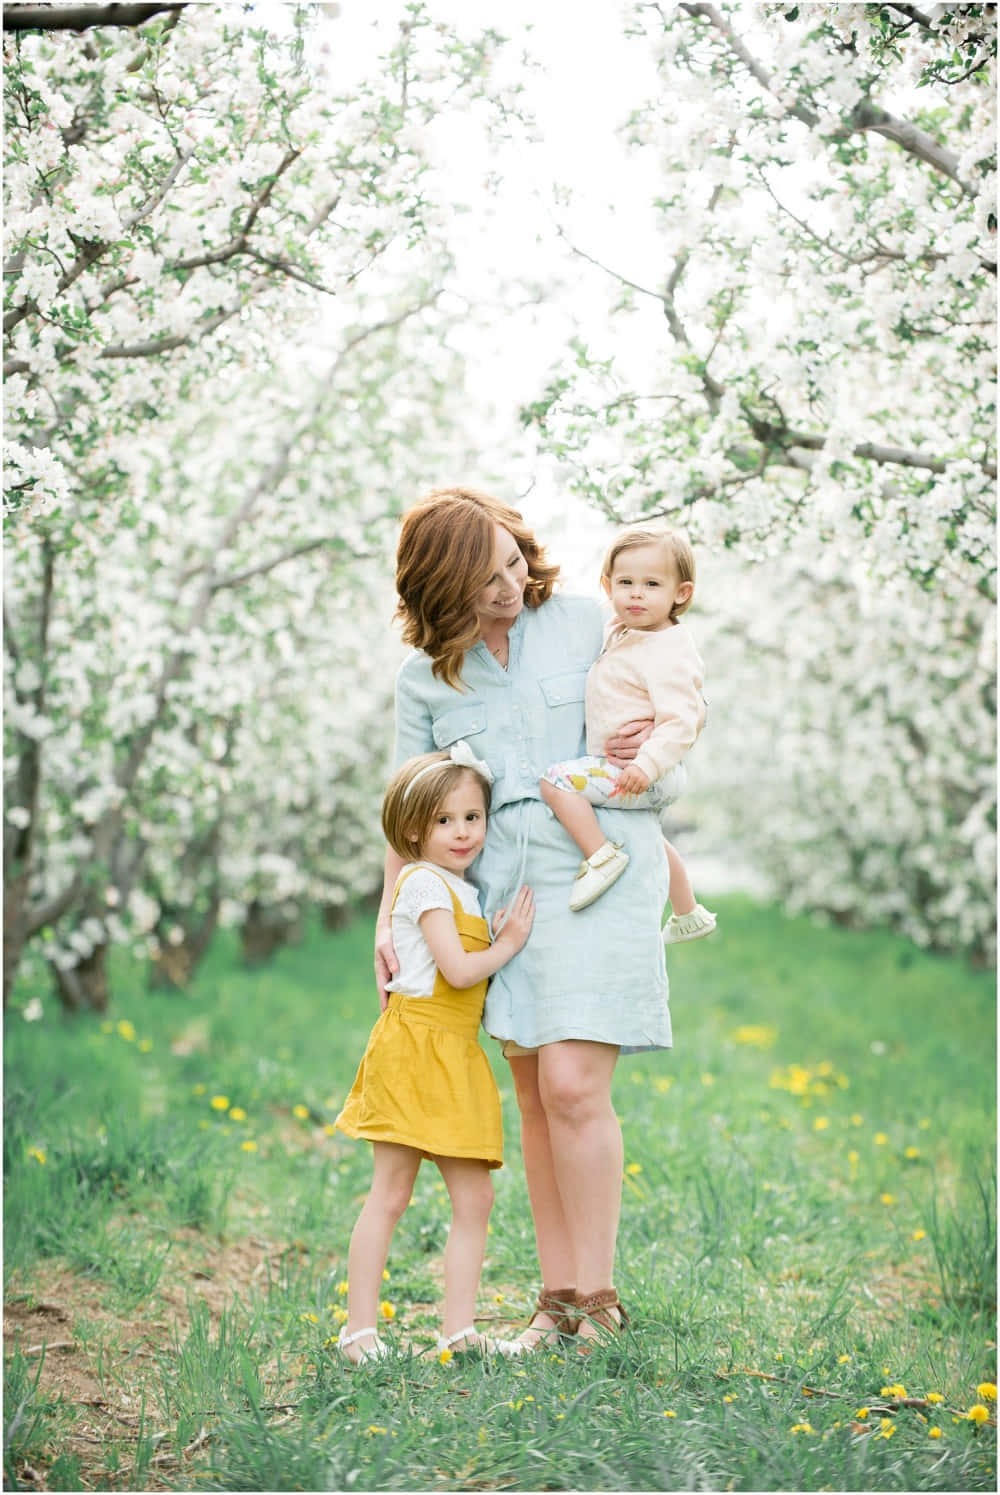 A Woman And Her Two Children In An Orchard